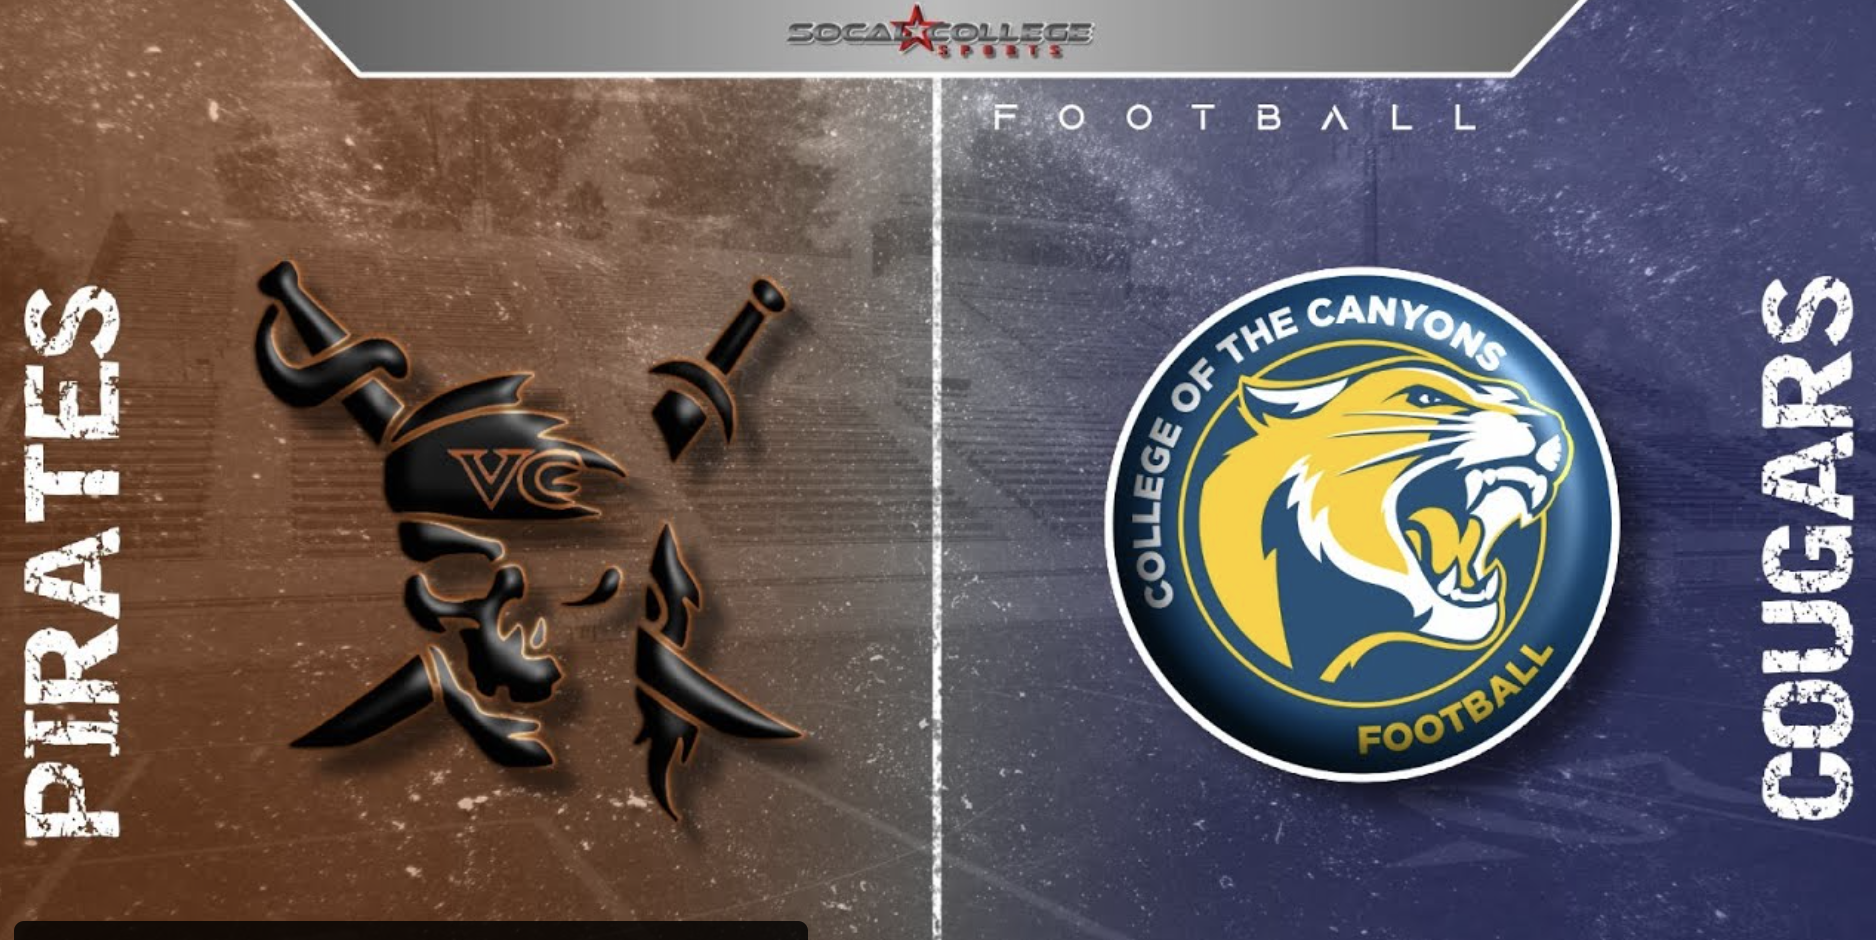 College of the Canyons football vs. Ventura College promotional graphic.